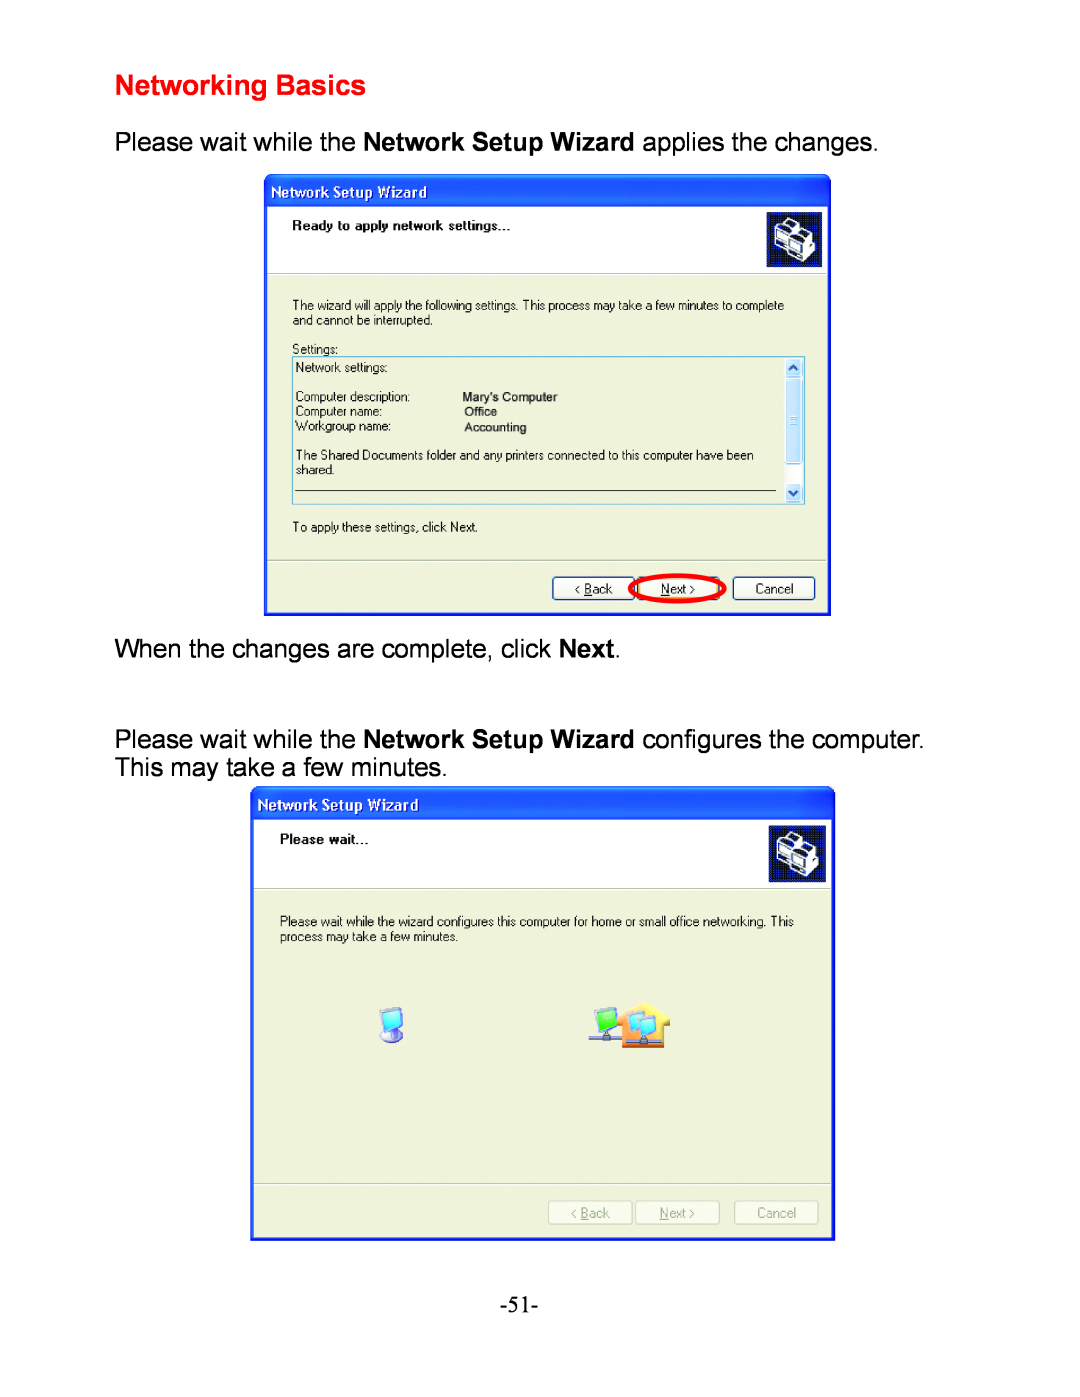 D-Link DI-604 manual Networking Basics, Please wait while the Network Setup Wizard applies the changes 